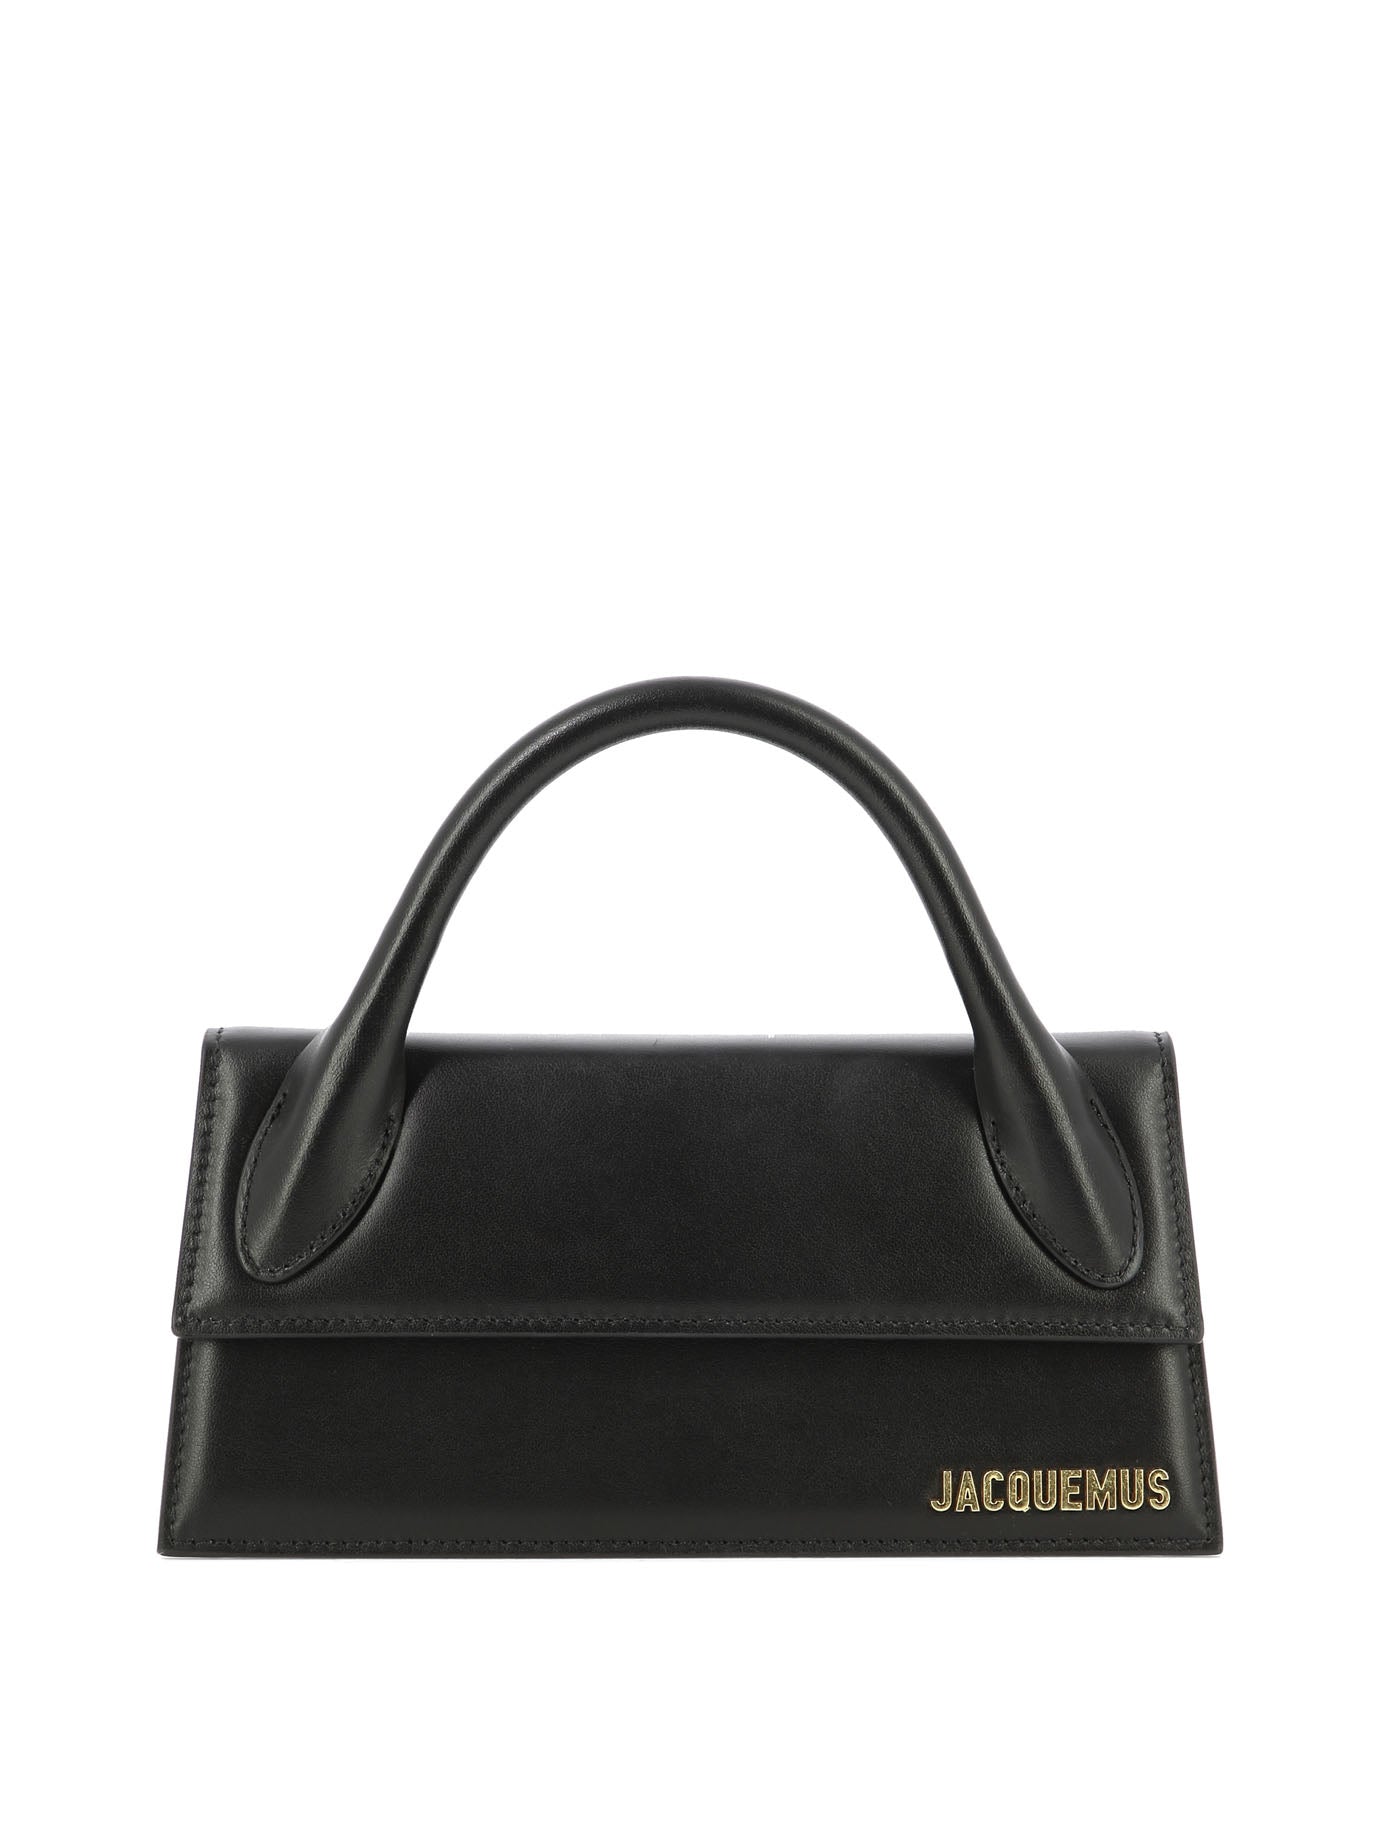 Le Chiquito by JACQUEMUS